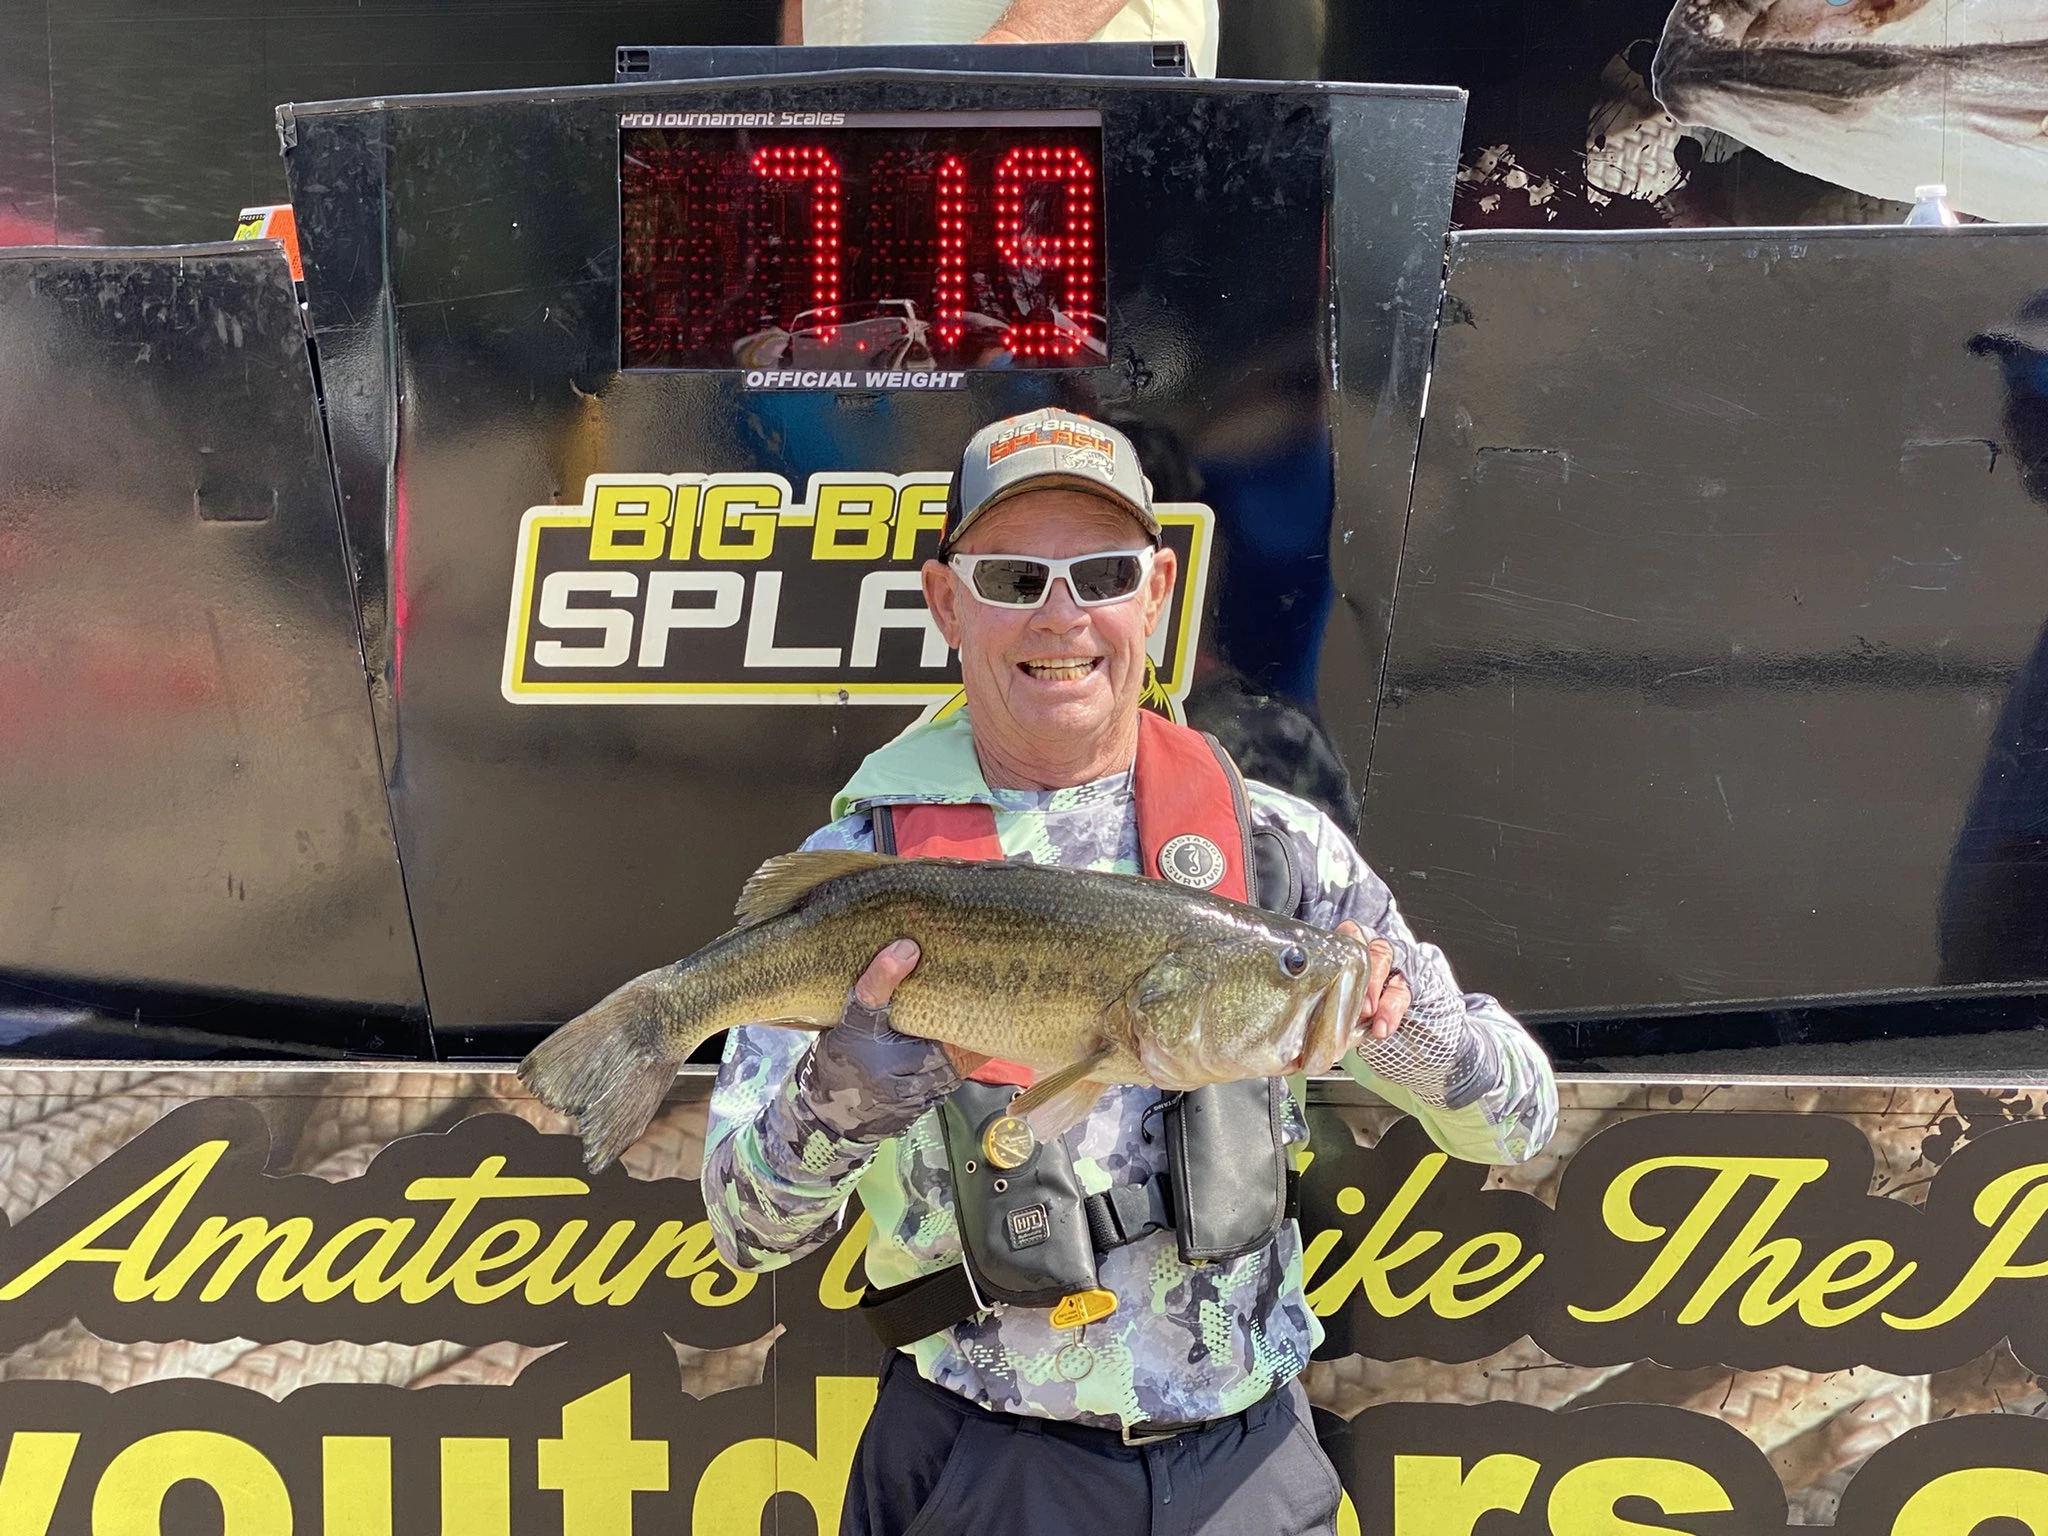 New Yorker Catches Monster Bass on First Cast at Lake Sam Rayburn